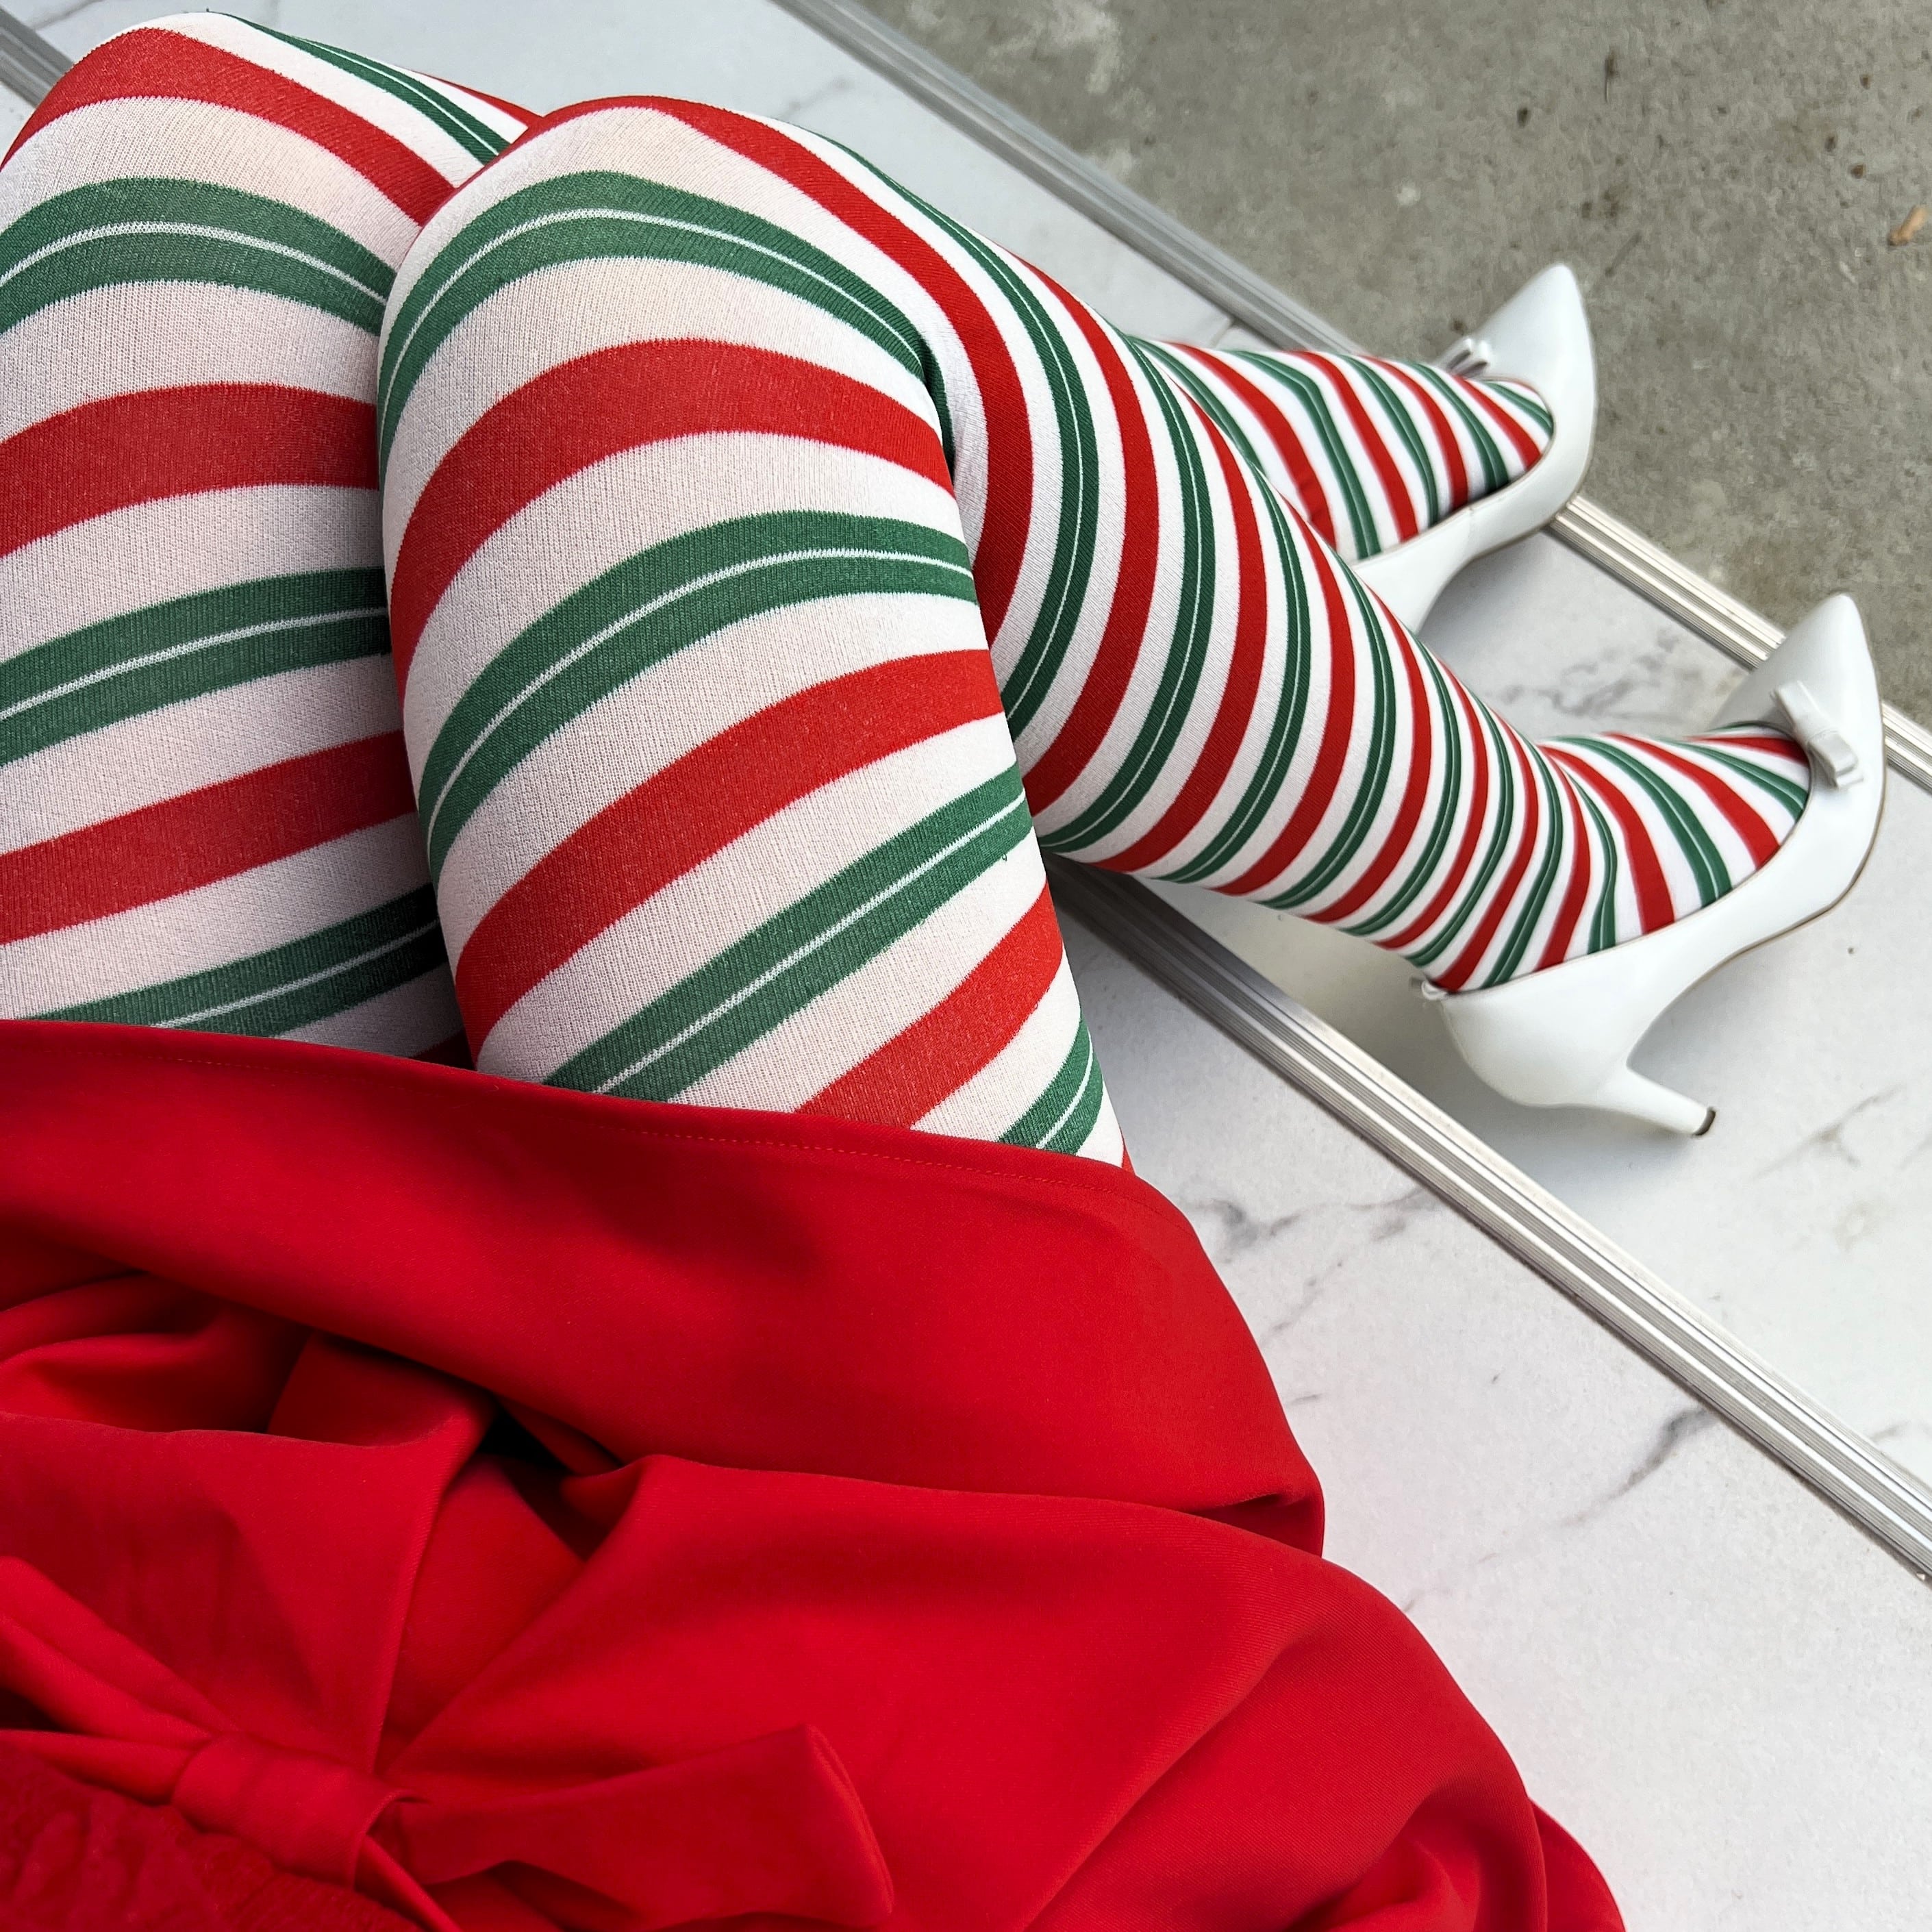 Layered Striped Red, Green & White Tights - The Best Christmas